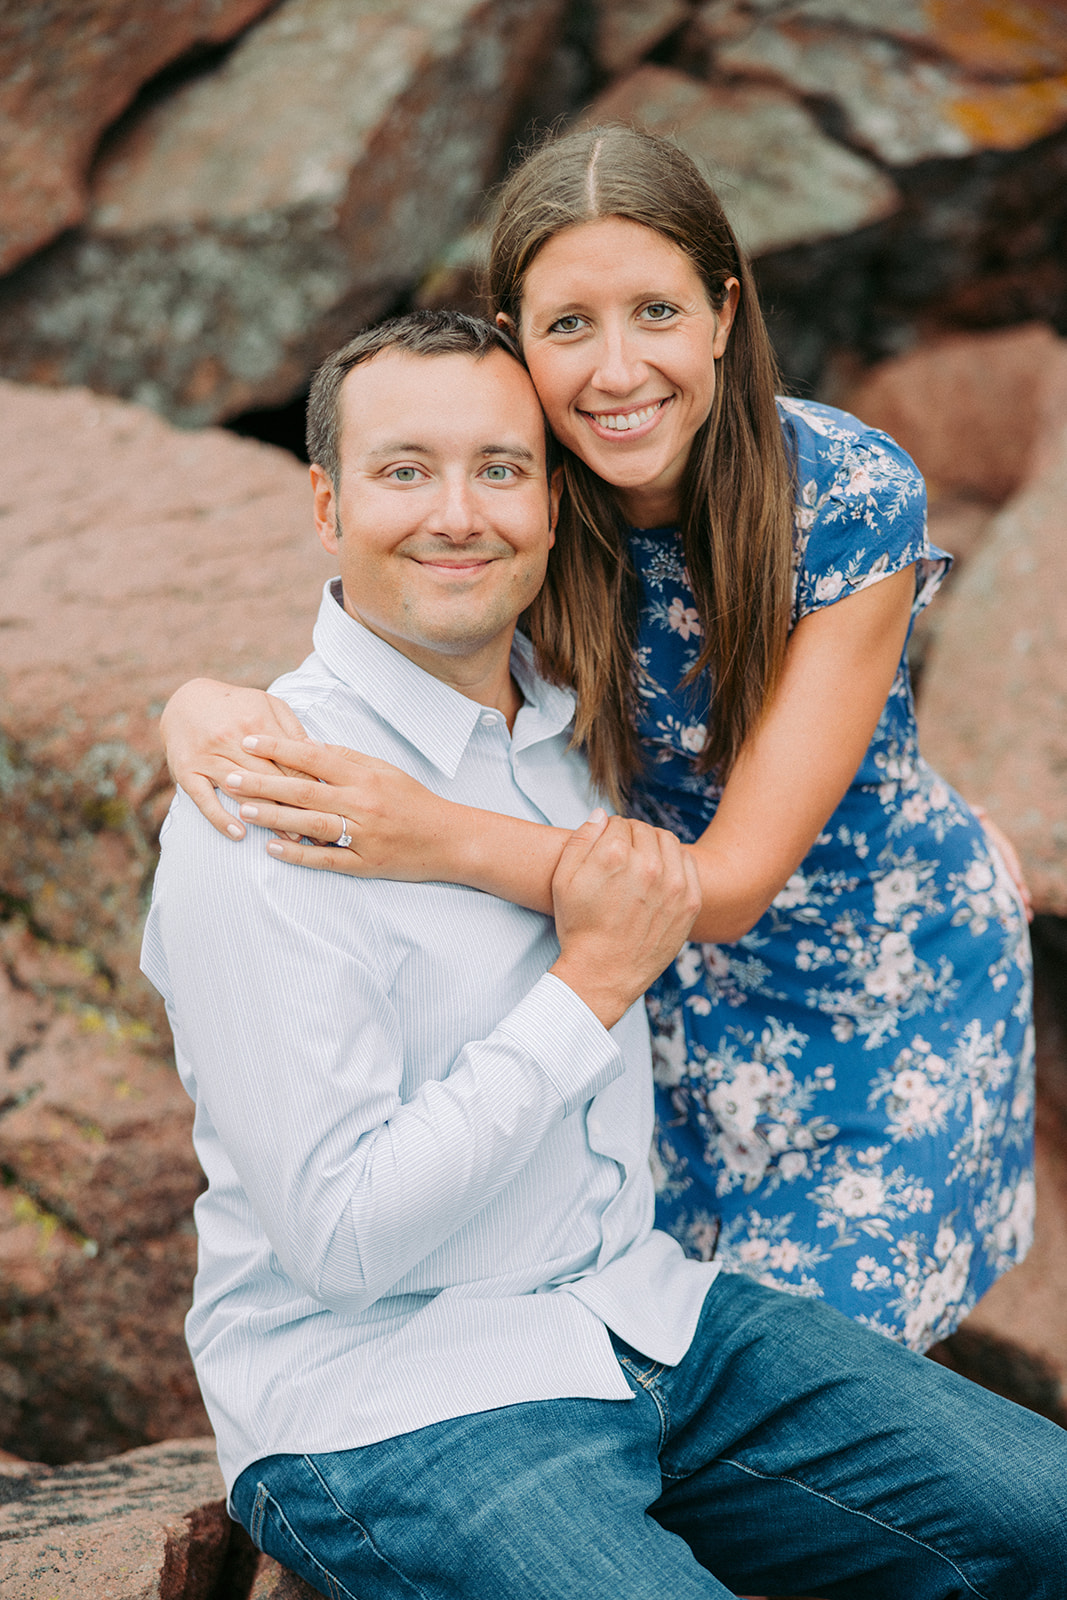 North Shore's Rugged Beauty: Jenna and AJ's engagement by the lake